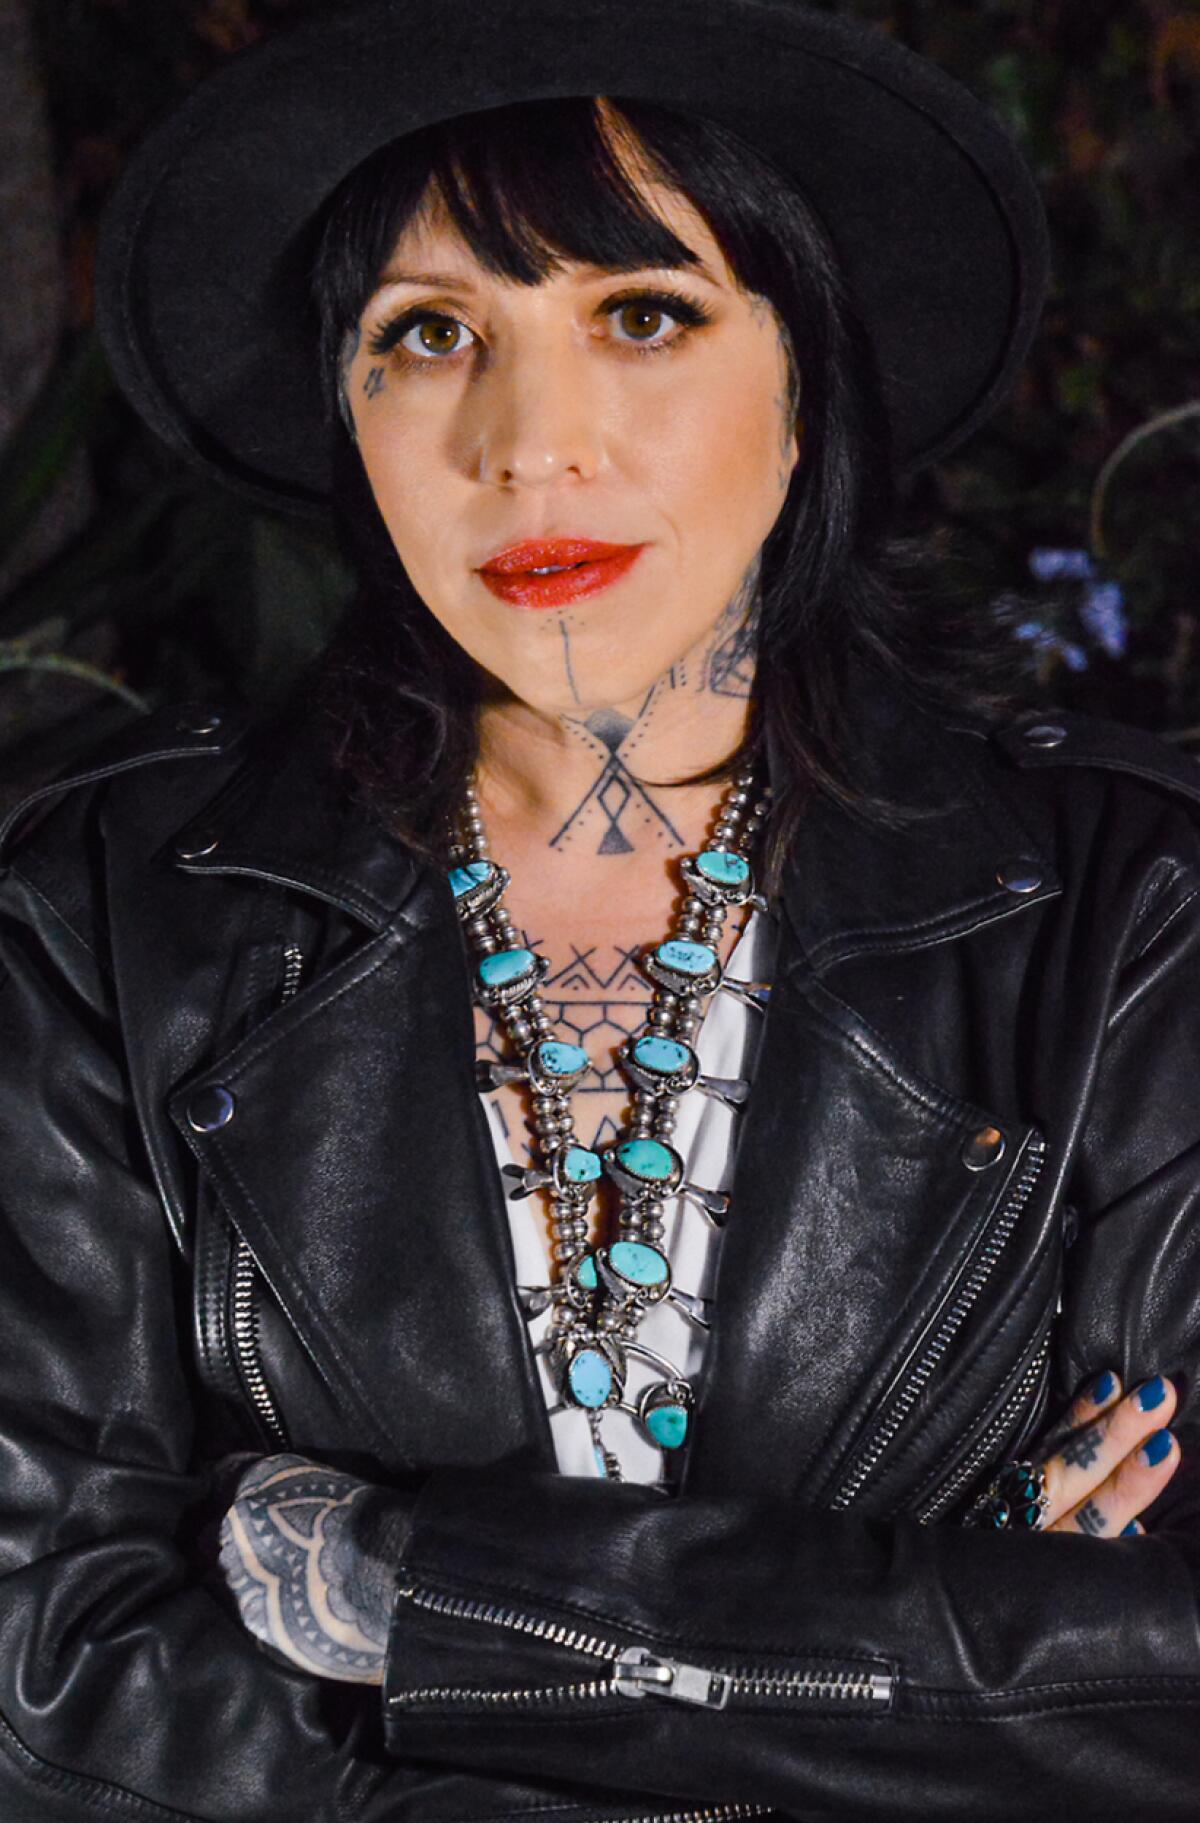 A woman with neck tattoos and turquoise necklace wears a black leather jacket.